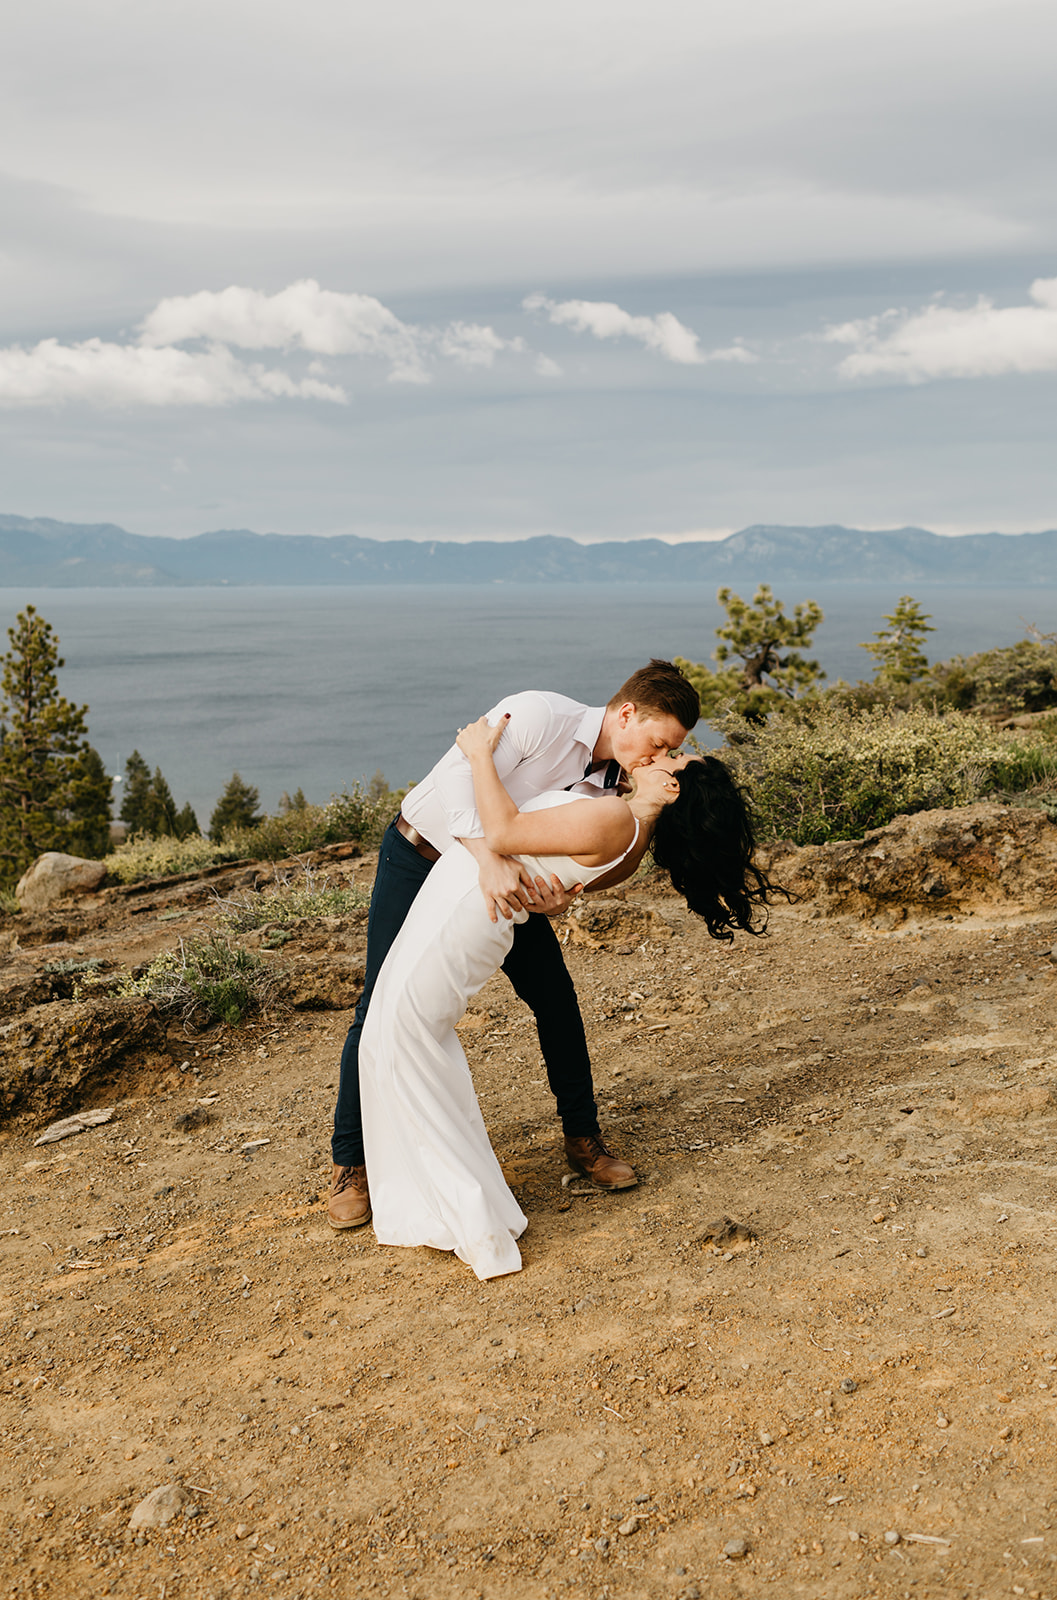 A couple shares a dip kiss in north lake tahoe